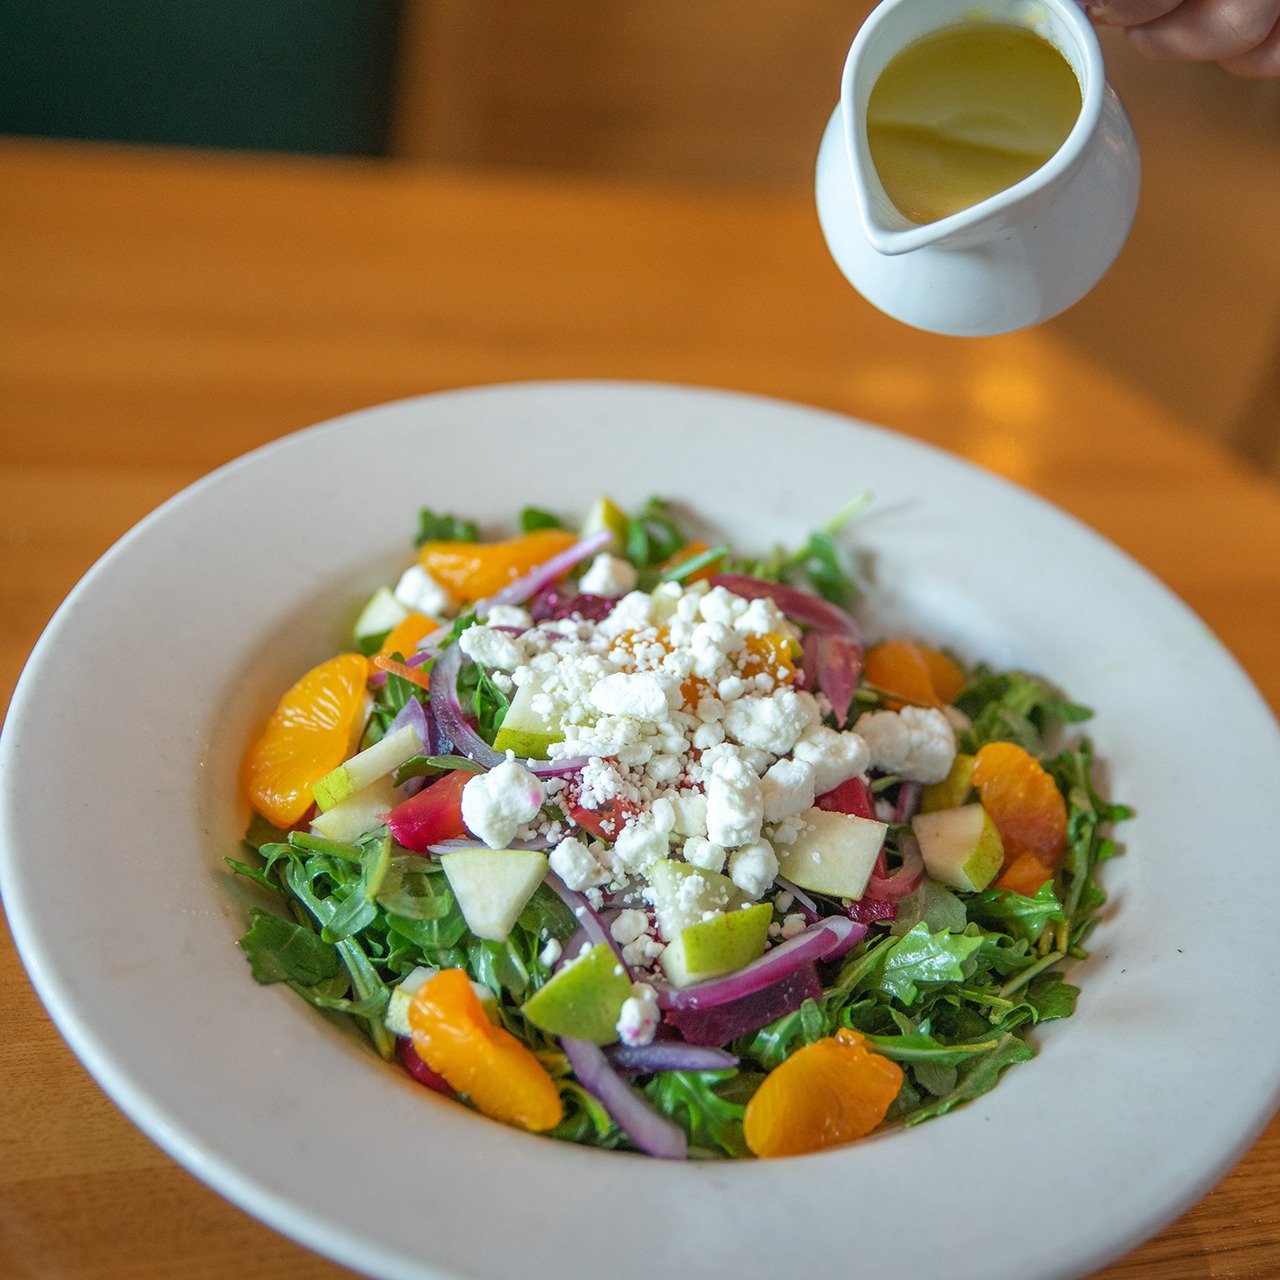 Feeling beet down? Let our Arugula Beet Salad lift your spirits! Packed with fresh arugula, vibrant beets, zesty mandarin oranges, a sprinkle of goat cheese, and delicious red wine vinaigrette.

#NapaFlats #NapaFlatsWoodFiredKitchen #ArugulaBeetSalad